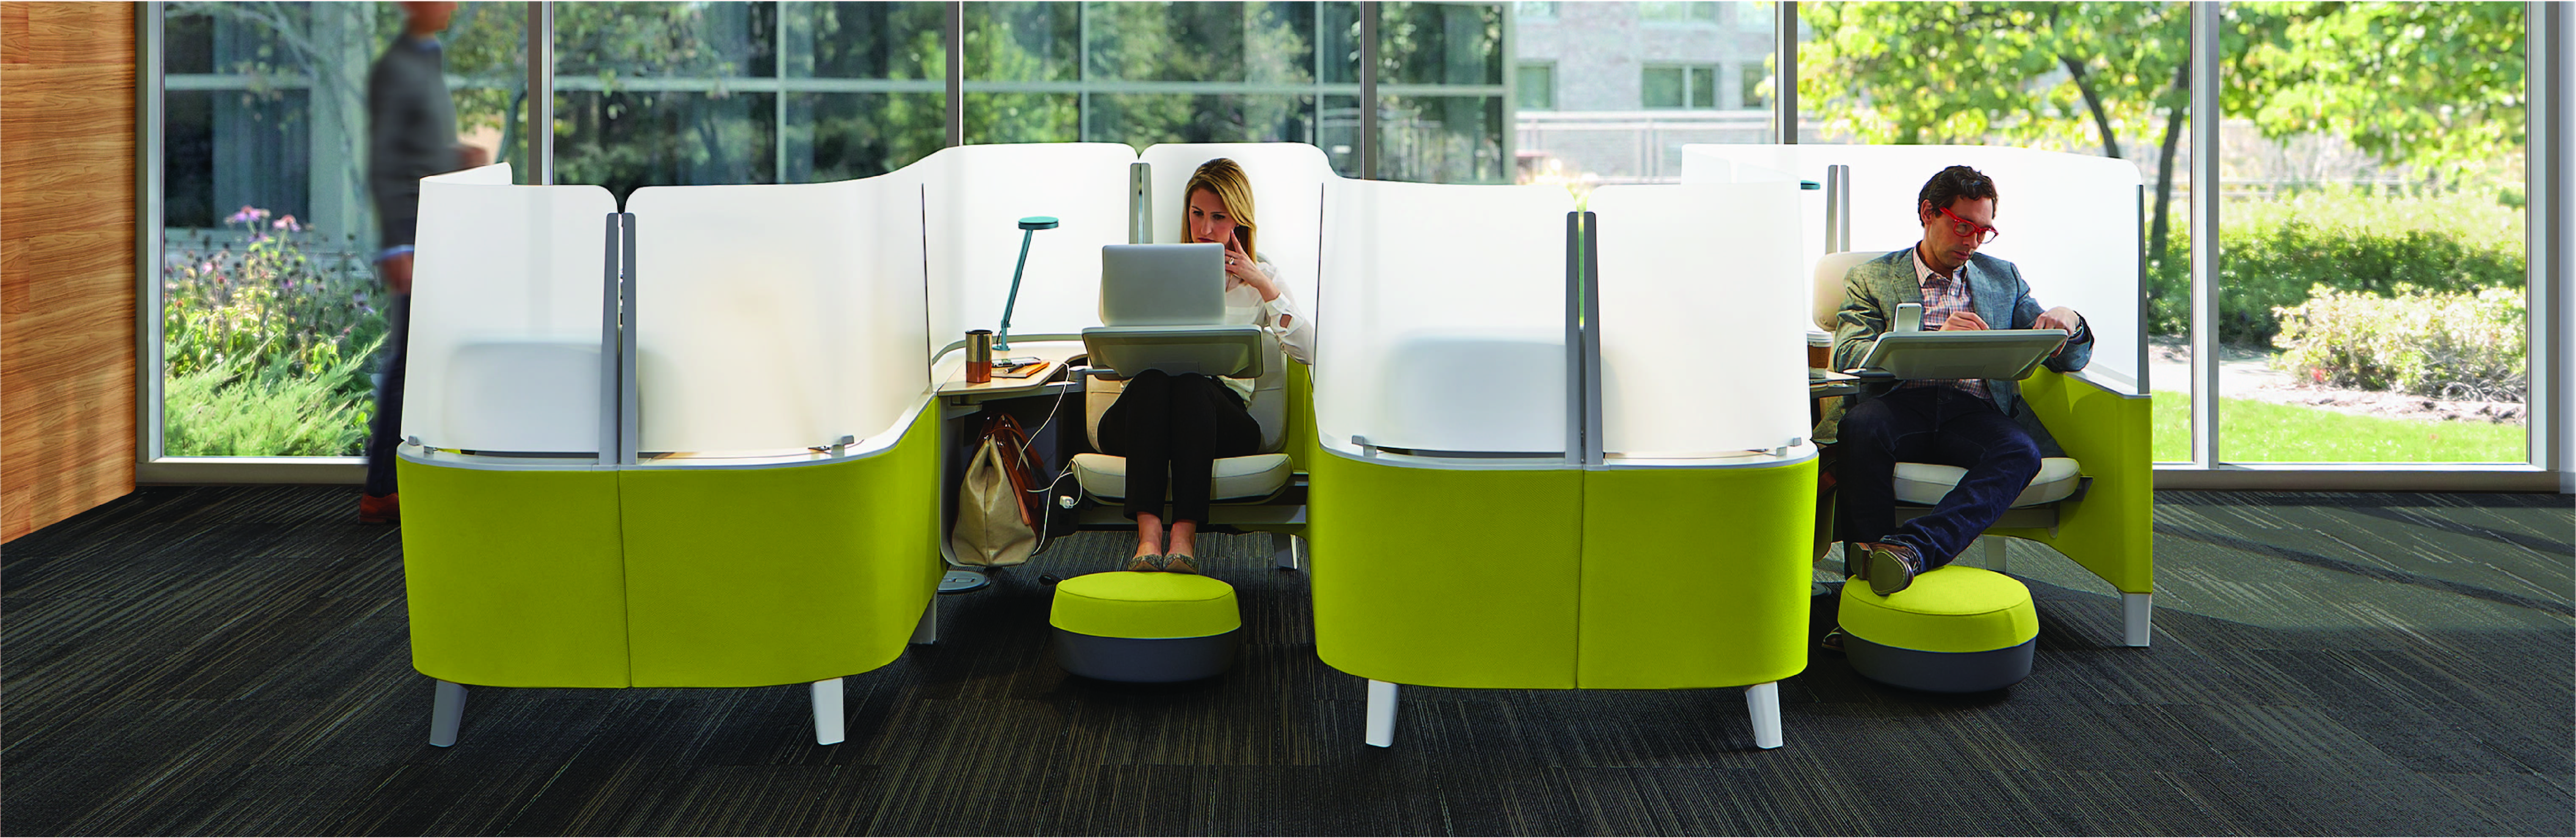 The Brody WorkLounge promotes mindfulness at work